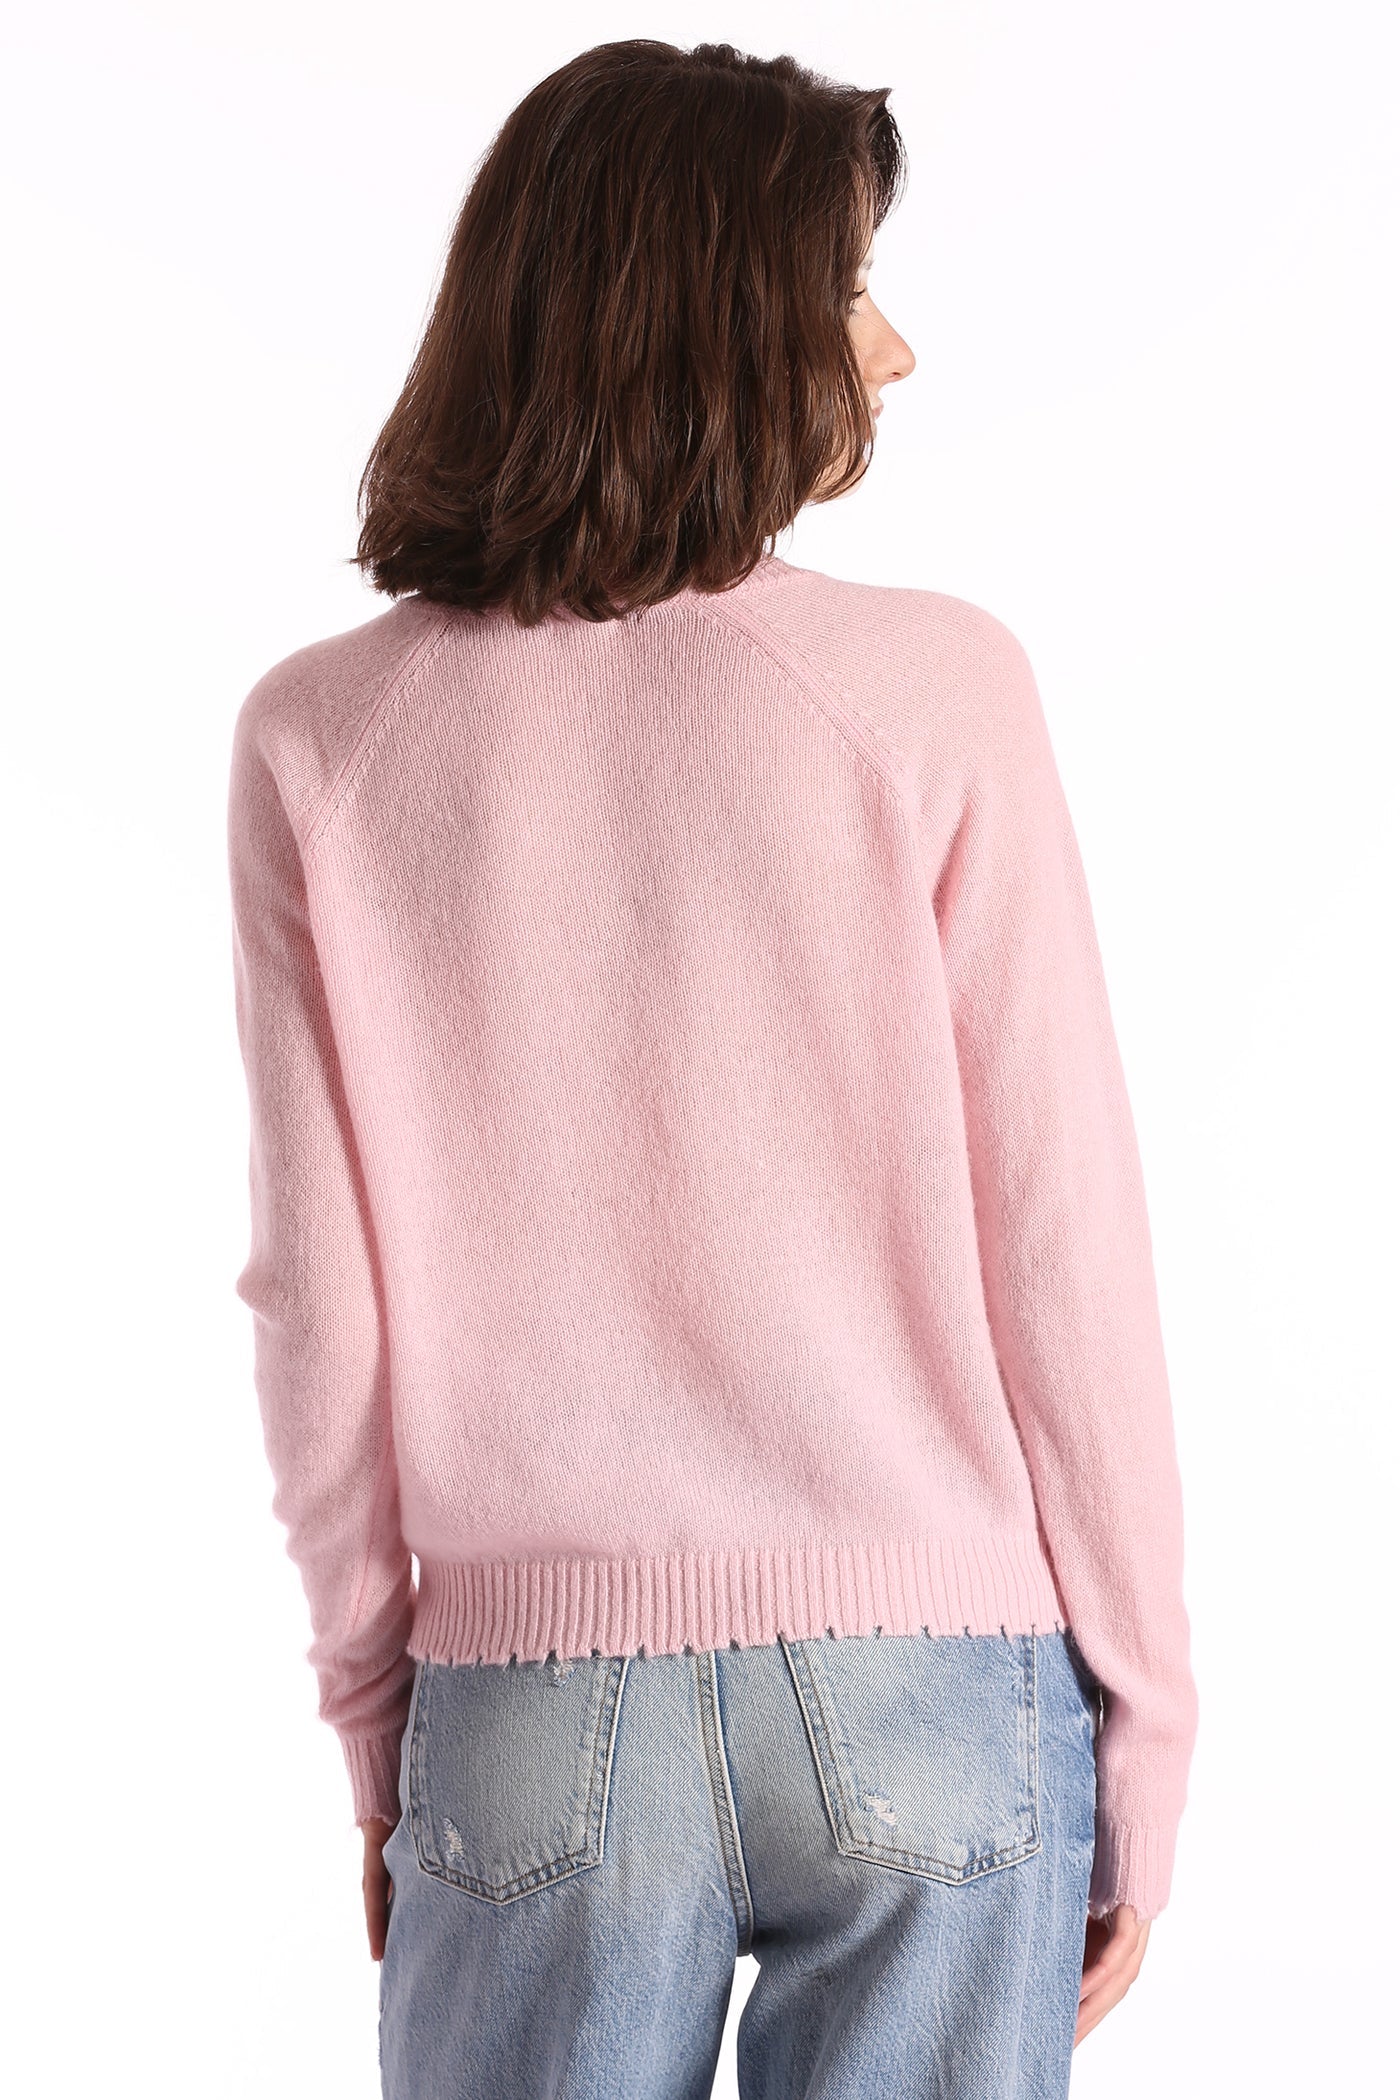 CASHMERE FRAYED EDGE CROPPED V-NECK IN PINK PEARL - Romi Boutique